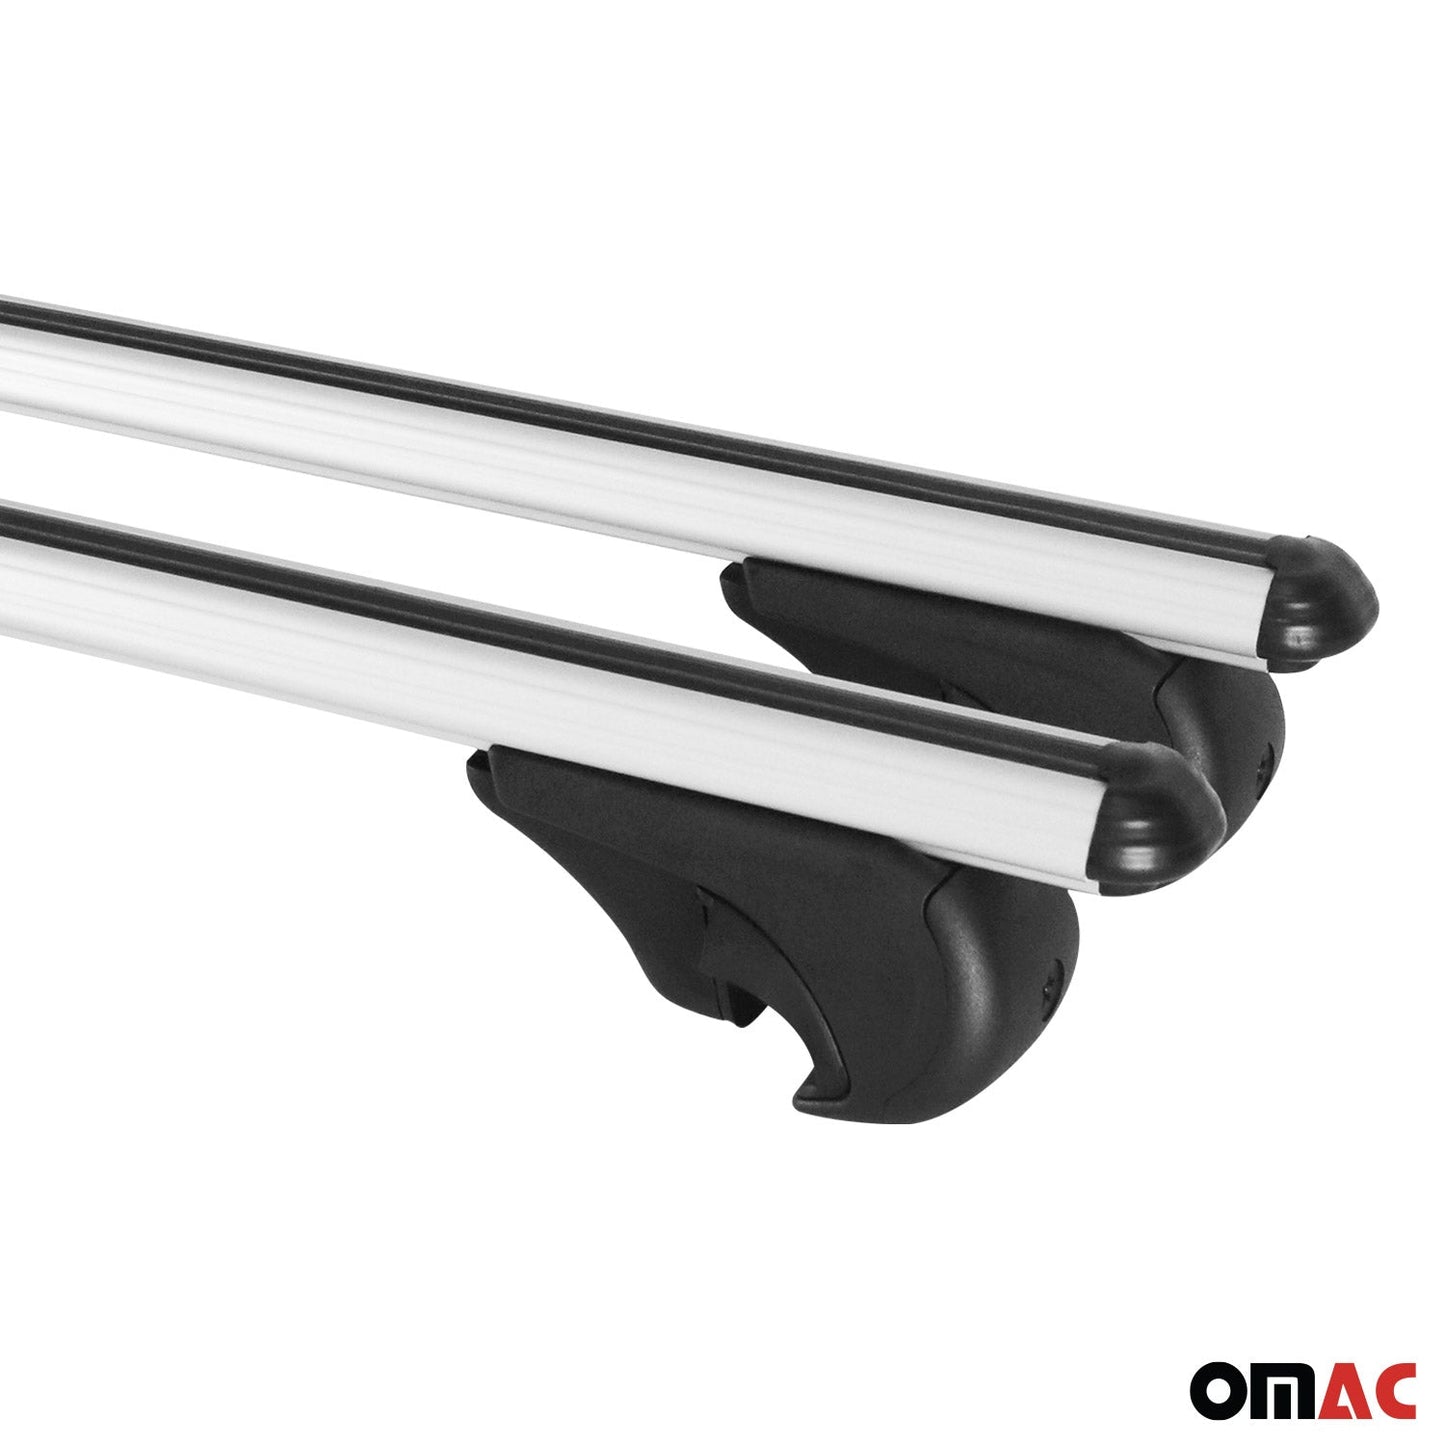 OMAC Lockable Roof Rack Cross Bars Carrier for Acura TSX Sport Wagon 2011-2014 Gray 10029696929M